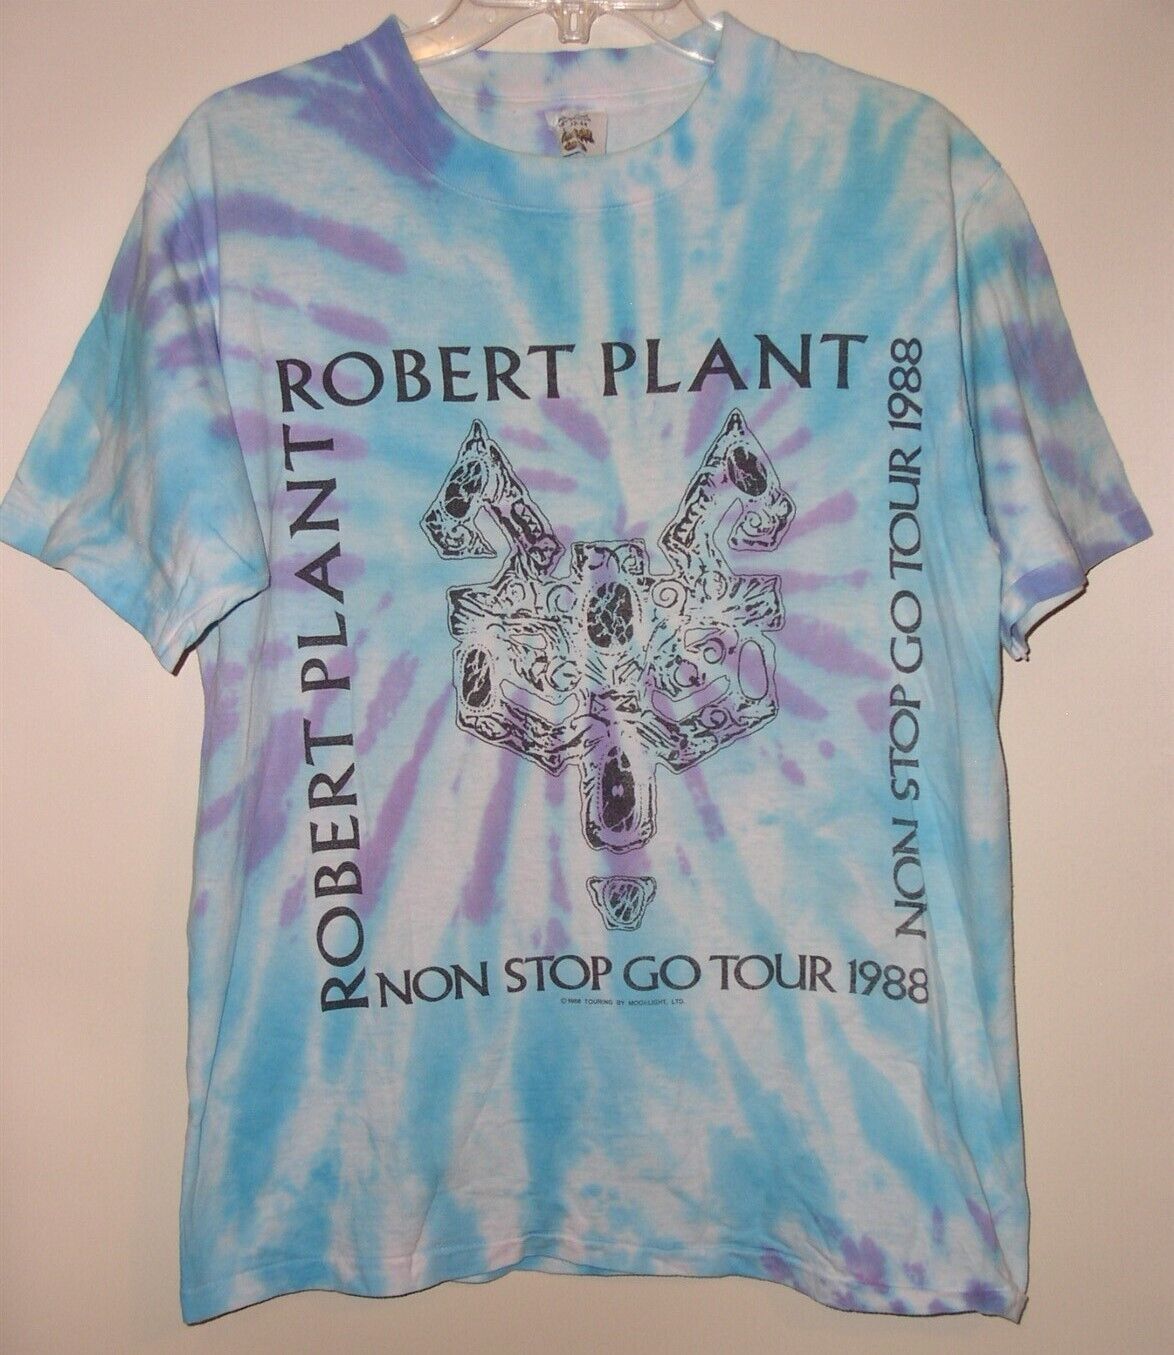 Primary image for Robert Plant Concert Tour T Shirt Vintage 1988 Non Stop Go Single Stitched LARGE